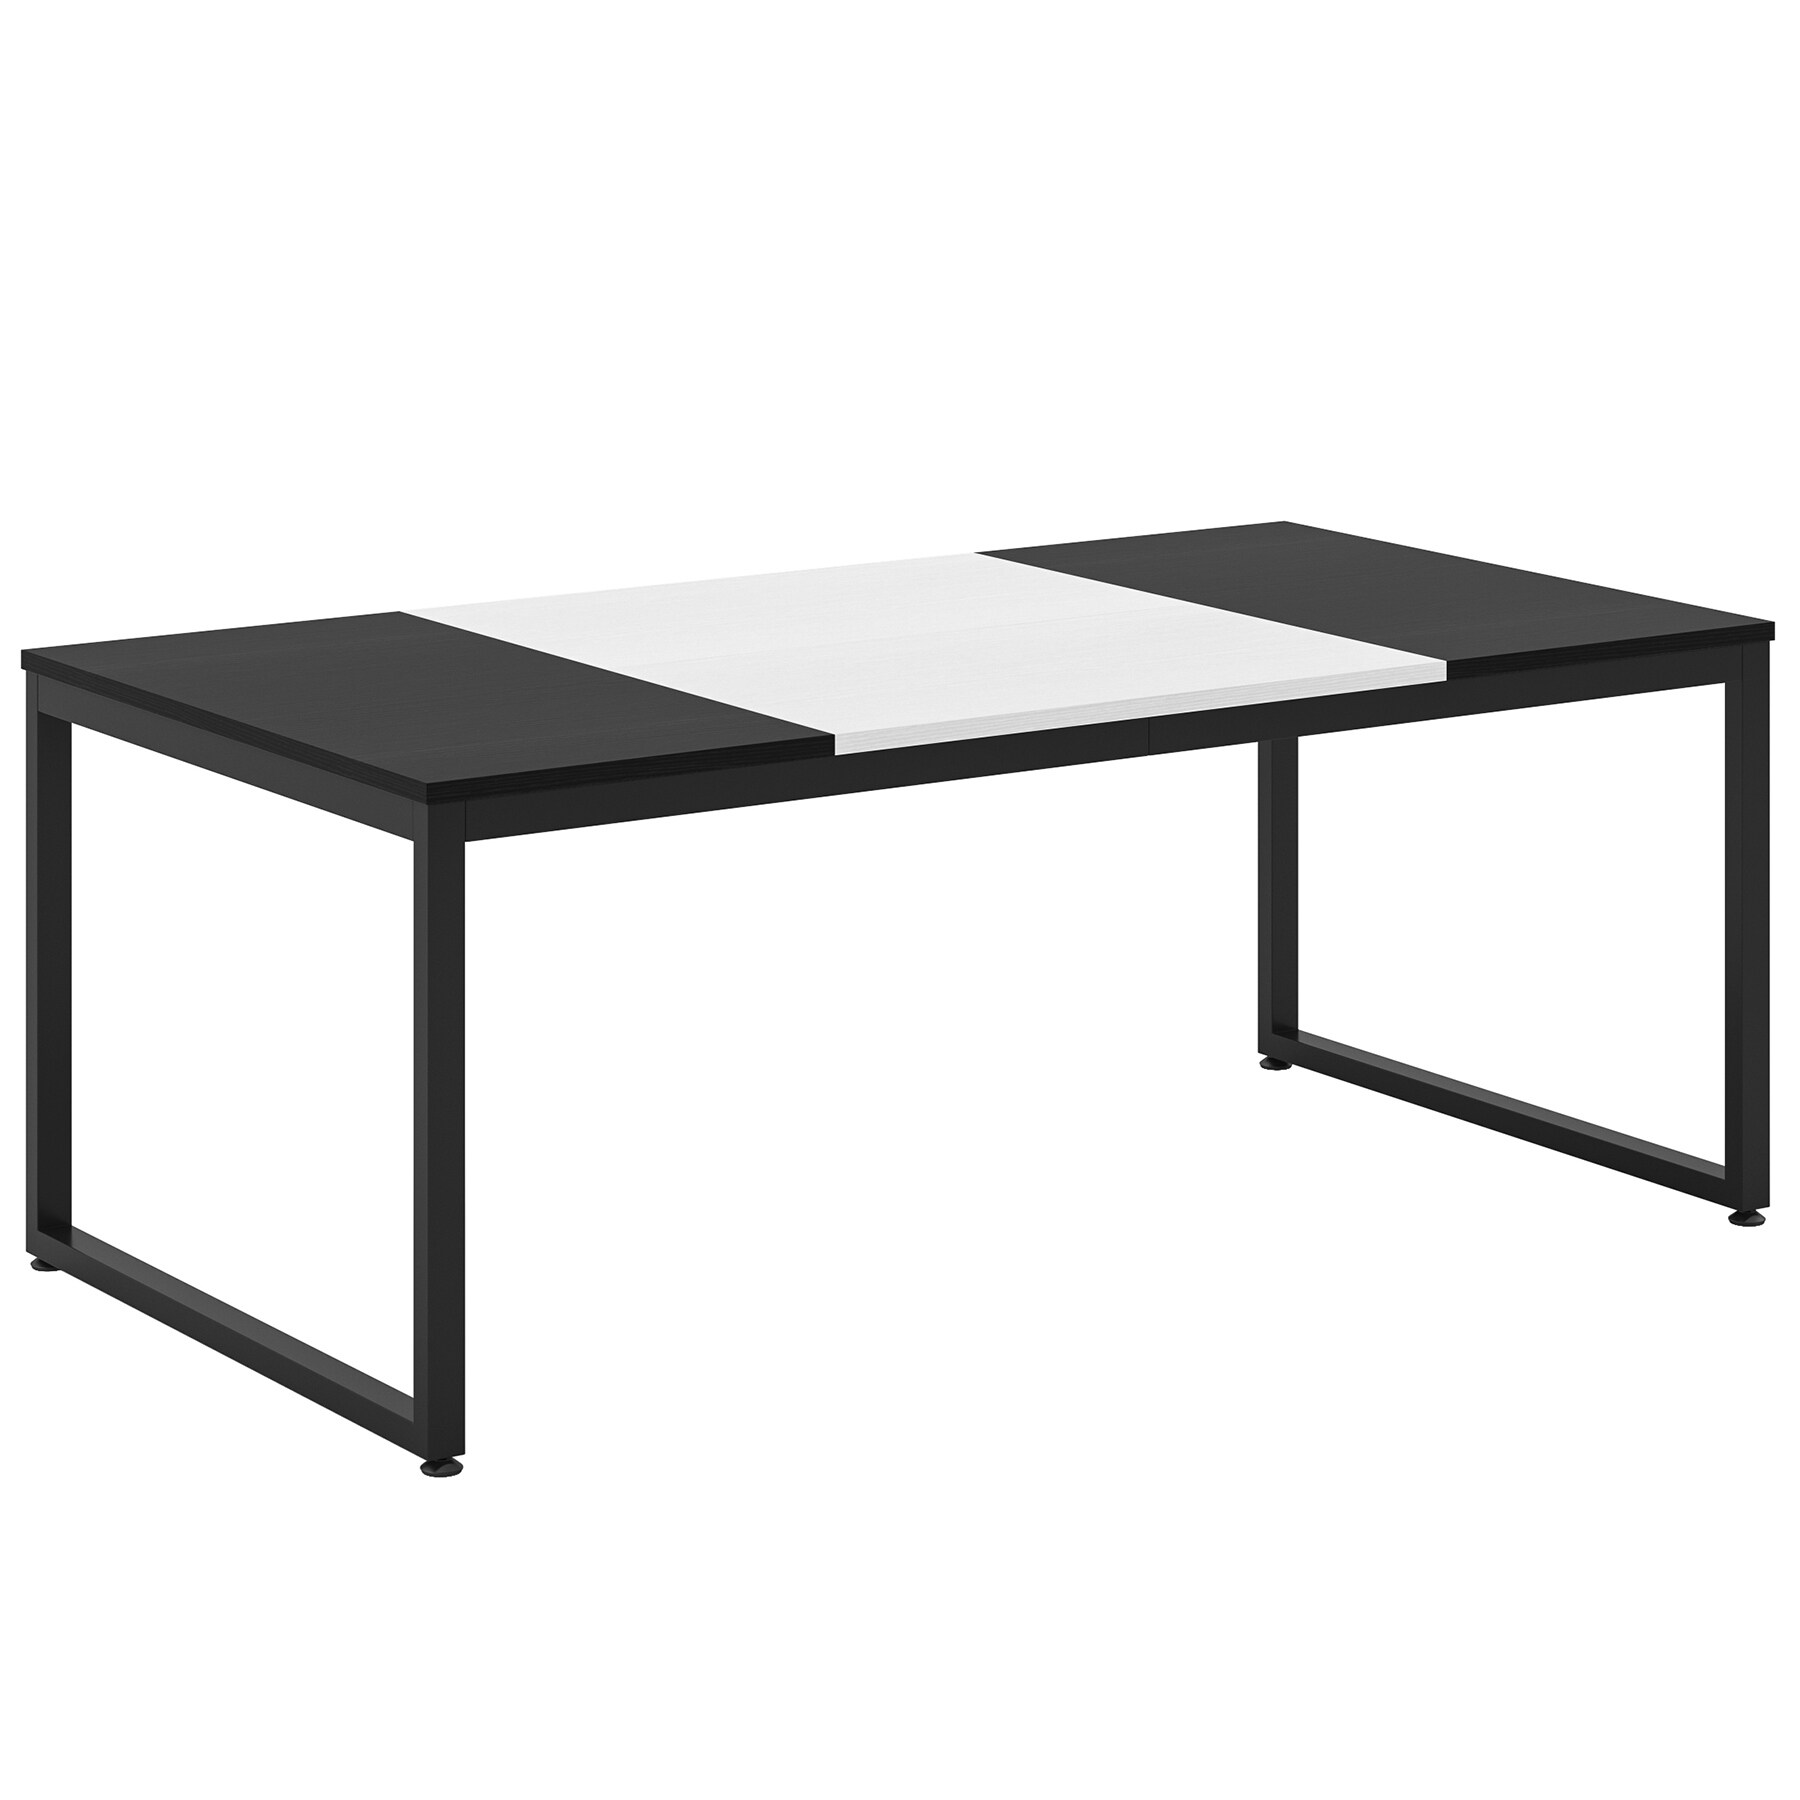 https://ak1.ostkcdn.com/images/products/is/images/direct/dd67565d228df81e94a1aa8205e91a140d9ac7b6/70.86%22-Executive-Desk%2C-Large-Office-Computer-Desk-with-Strong-Metal-Frame.jpg